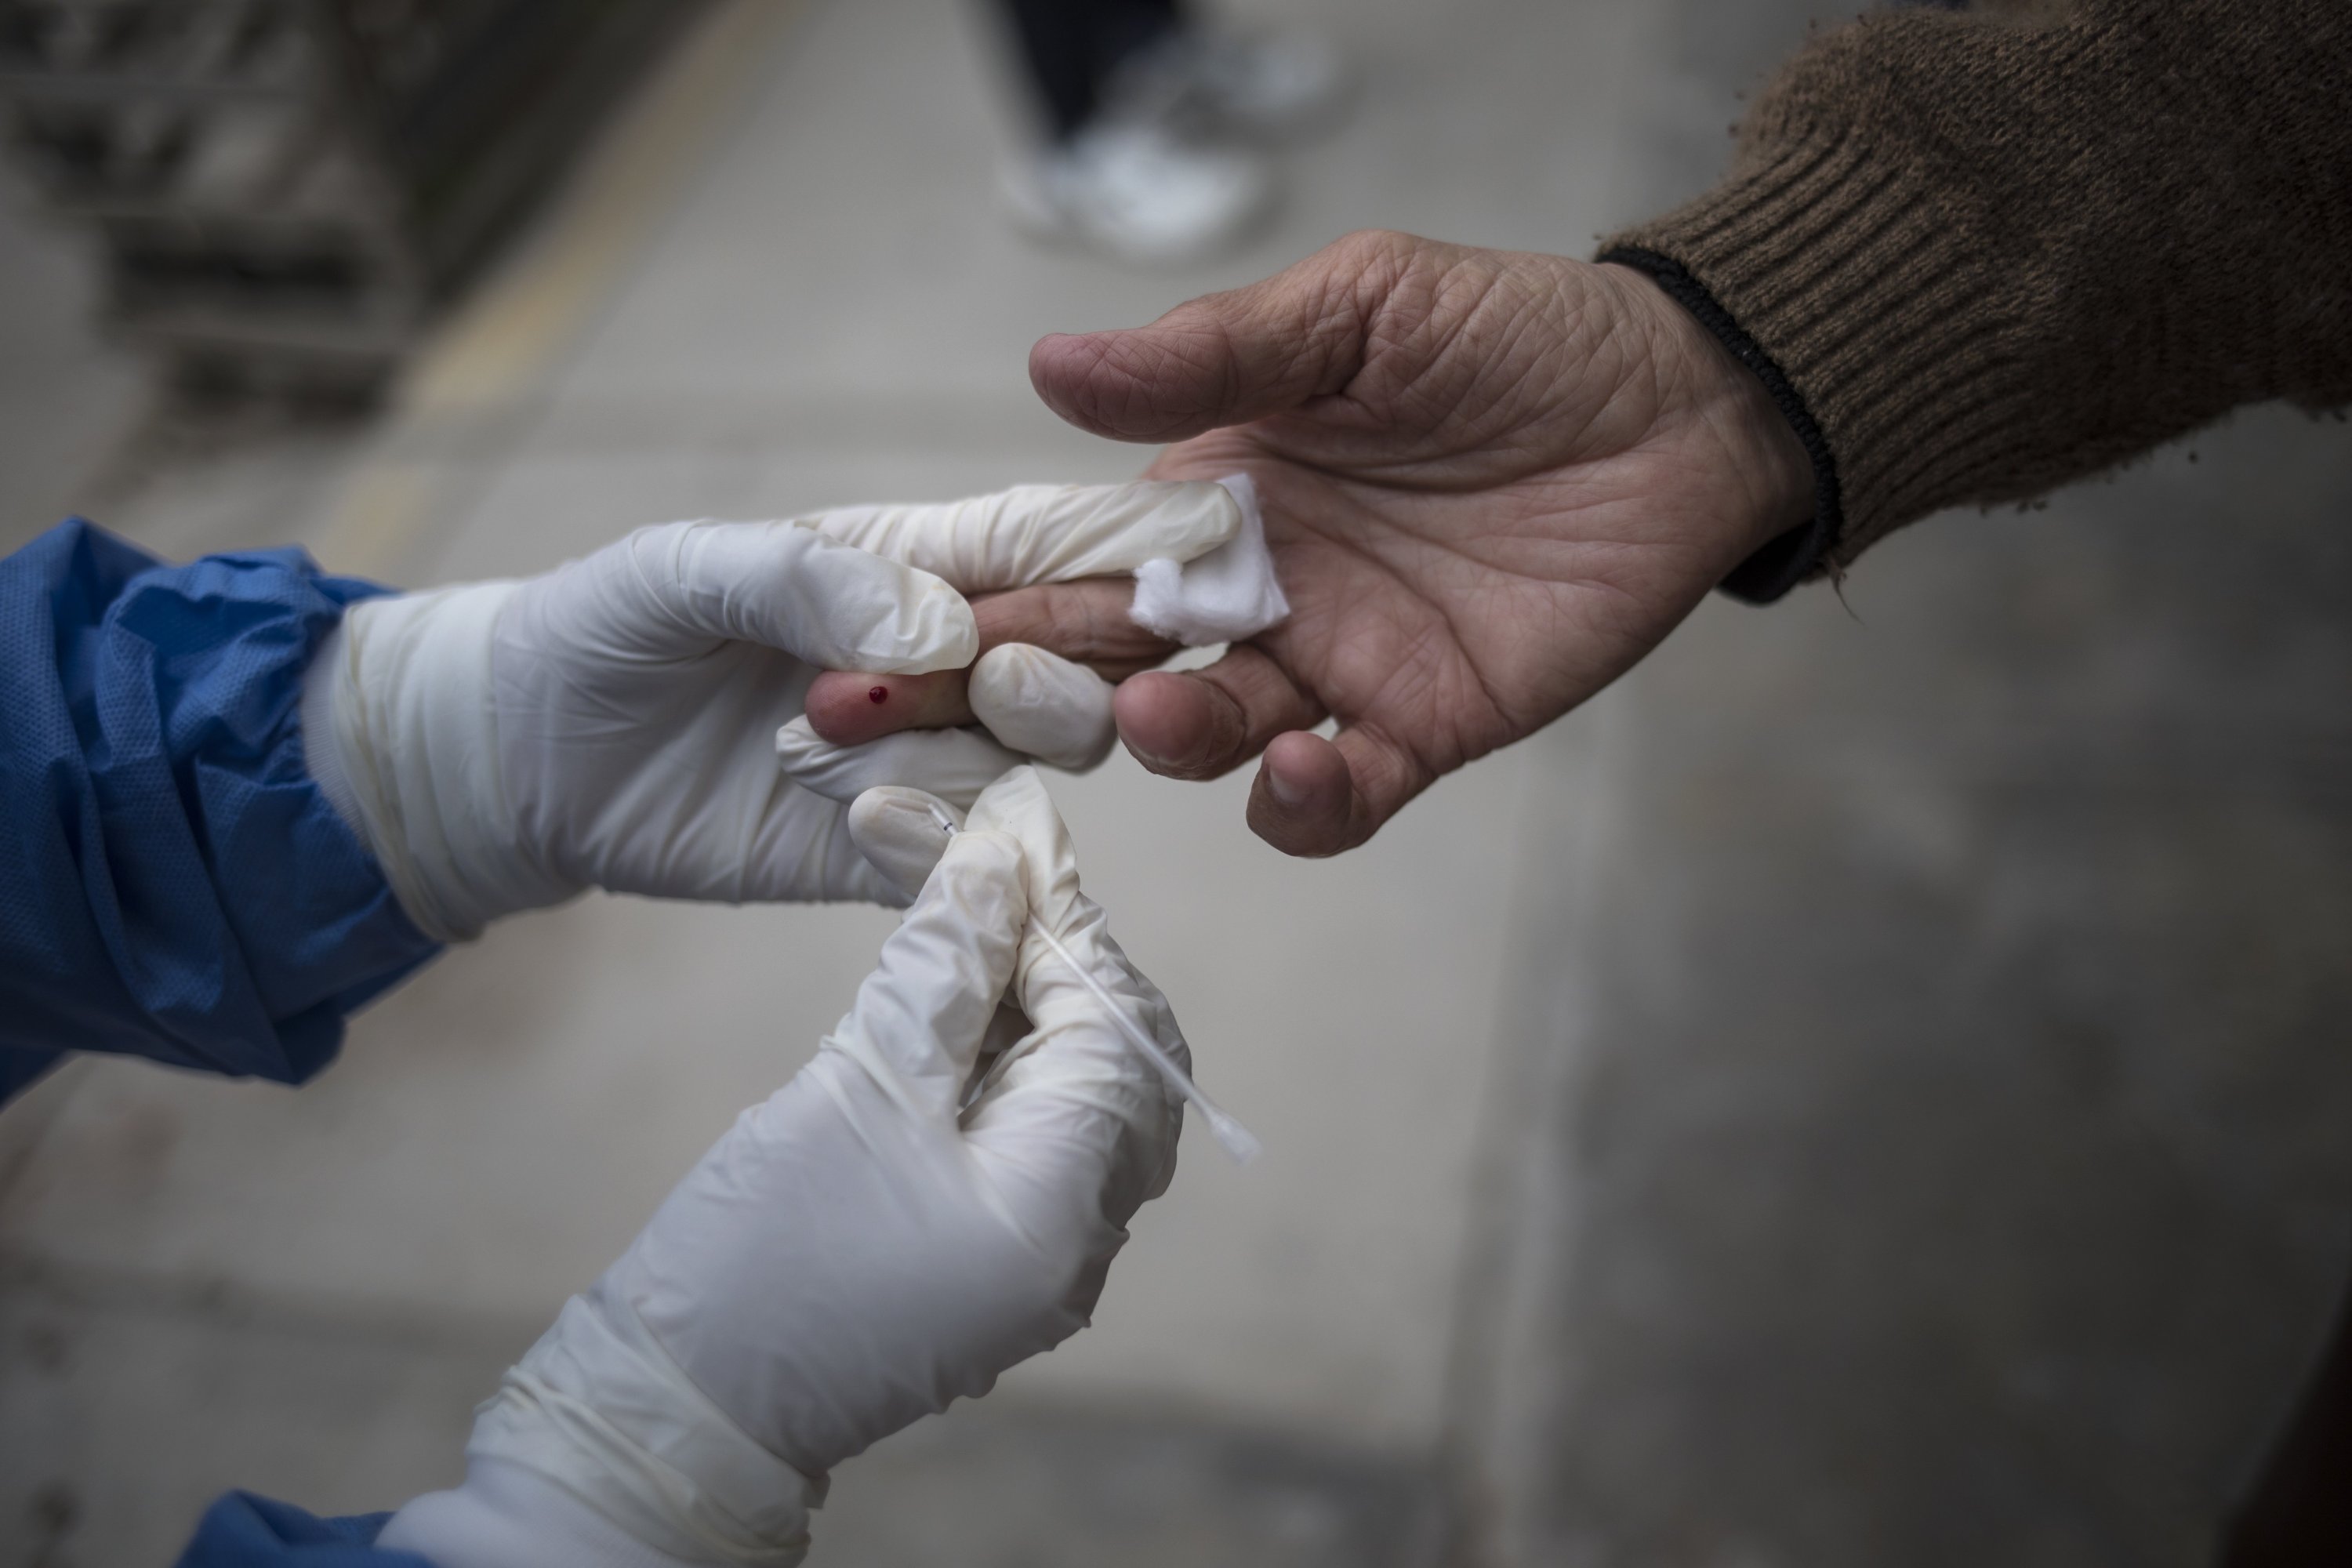 A healthcare worker takes a blood sample during a house-to-house rapid antibody test drive in Villa el Salvador, on the outskirts of Lima, Peru, June 30, 2020. (AP Photo)